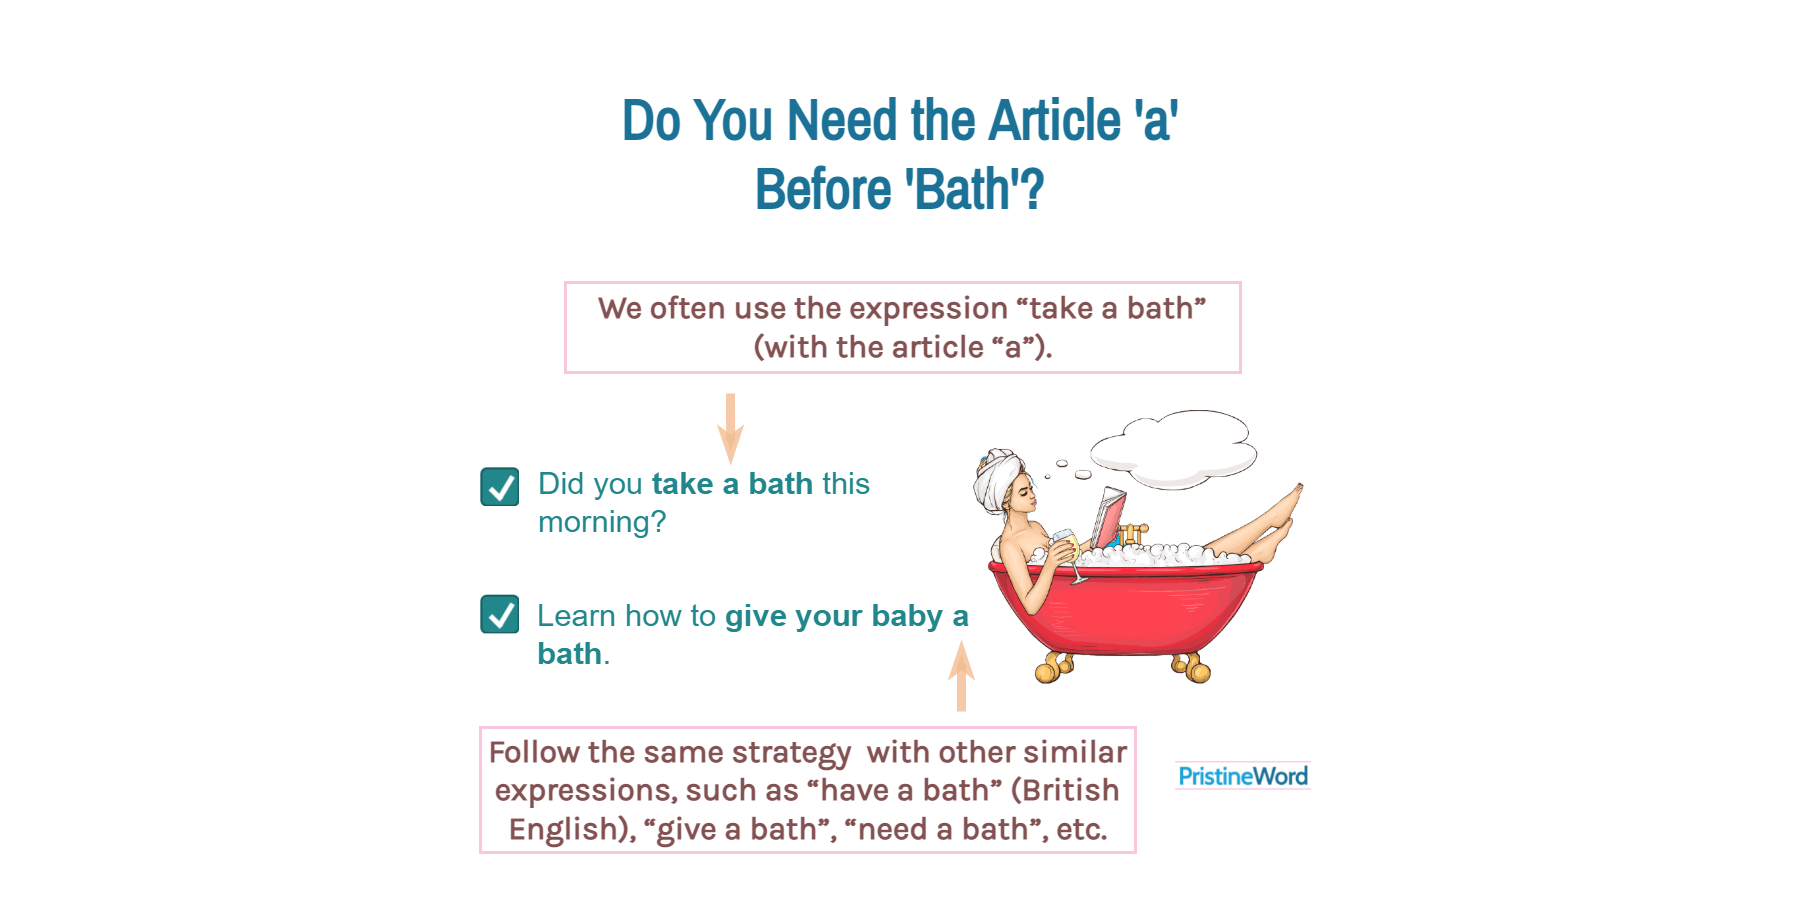 Do You Need The Article 'a' Before 'Bath'?